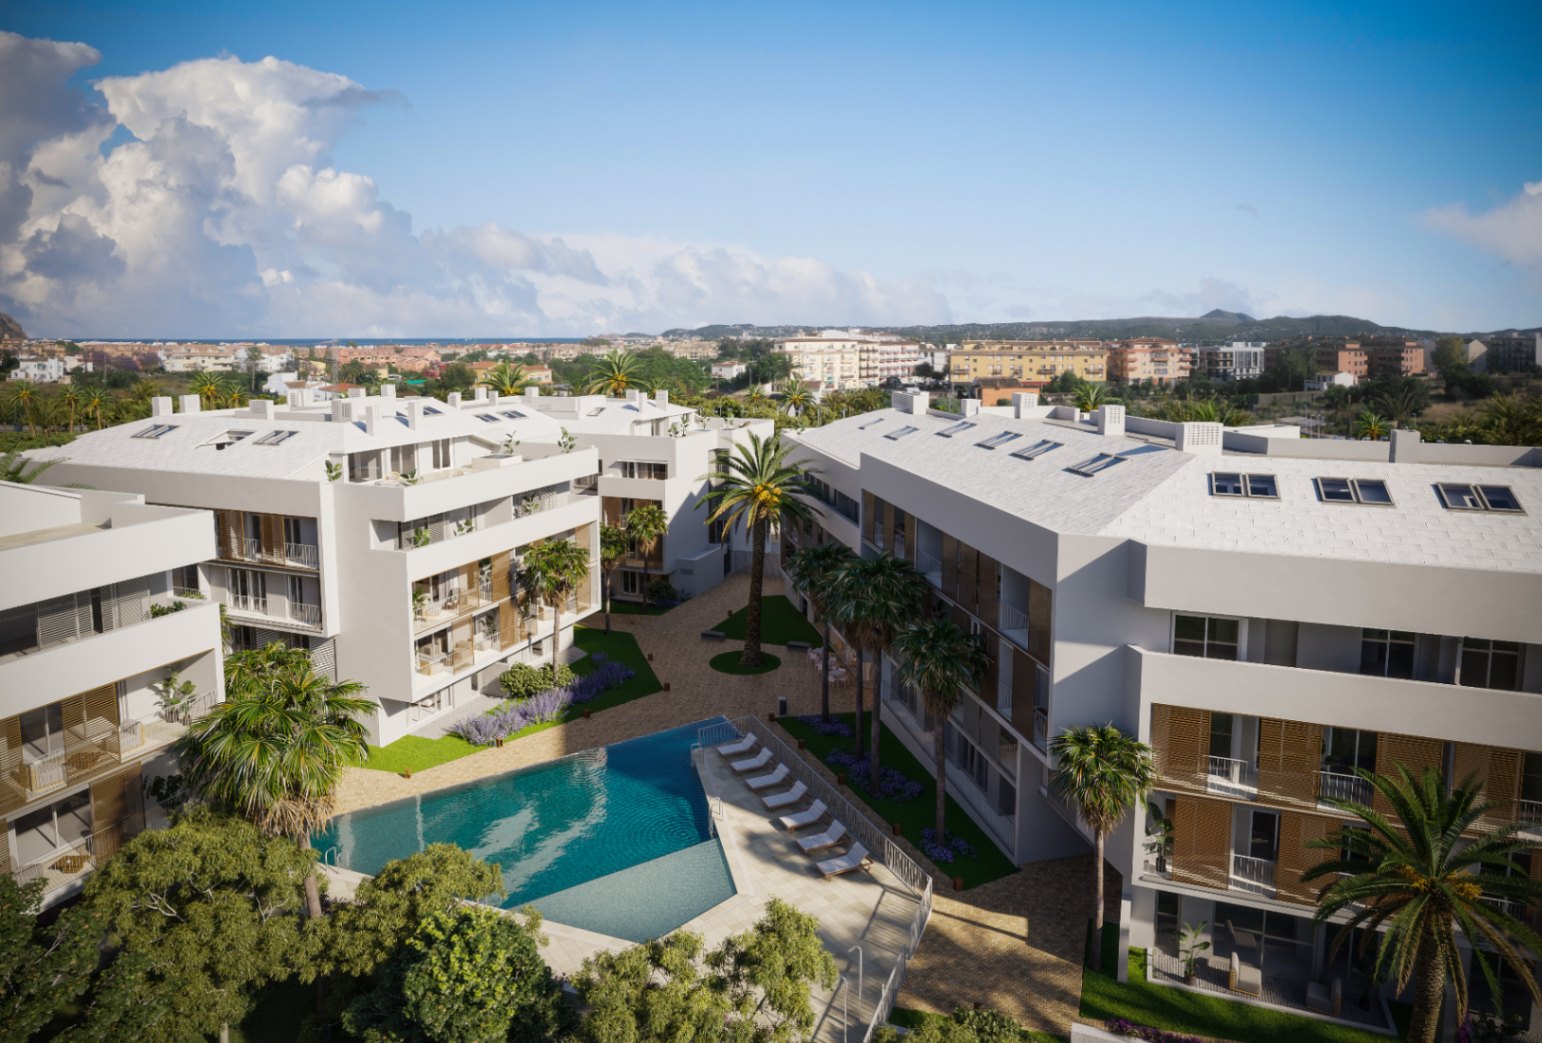 Javea: Beautiful new build apartment within walking distance of the sea